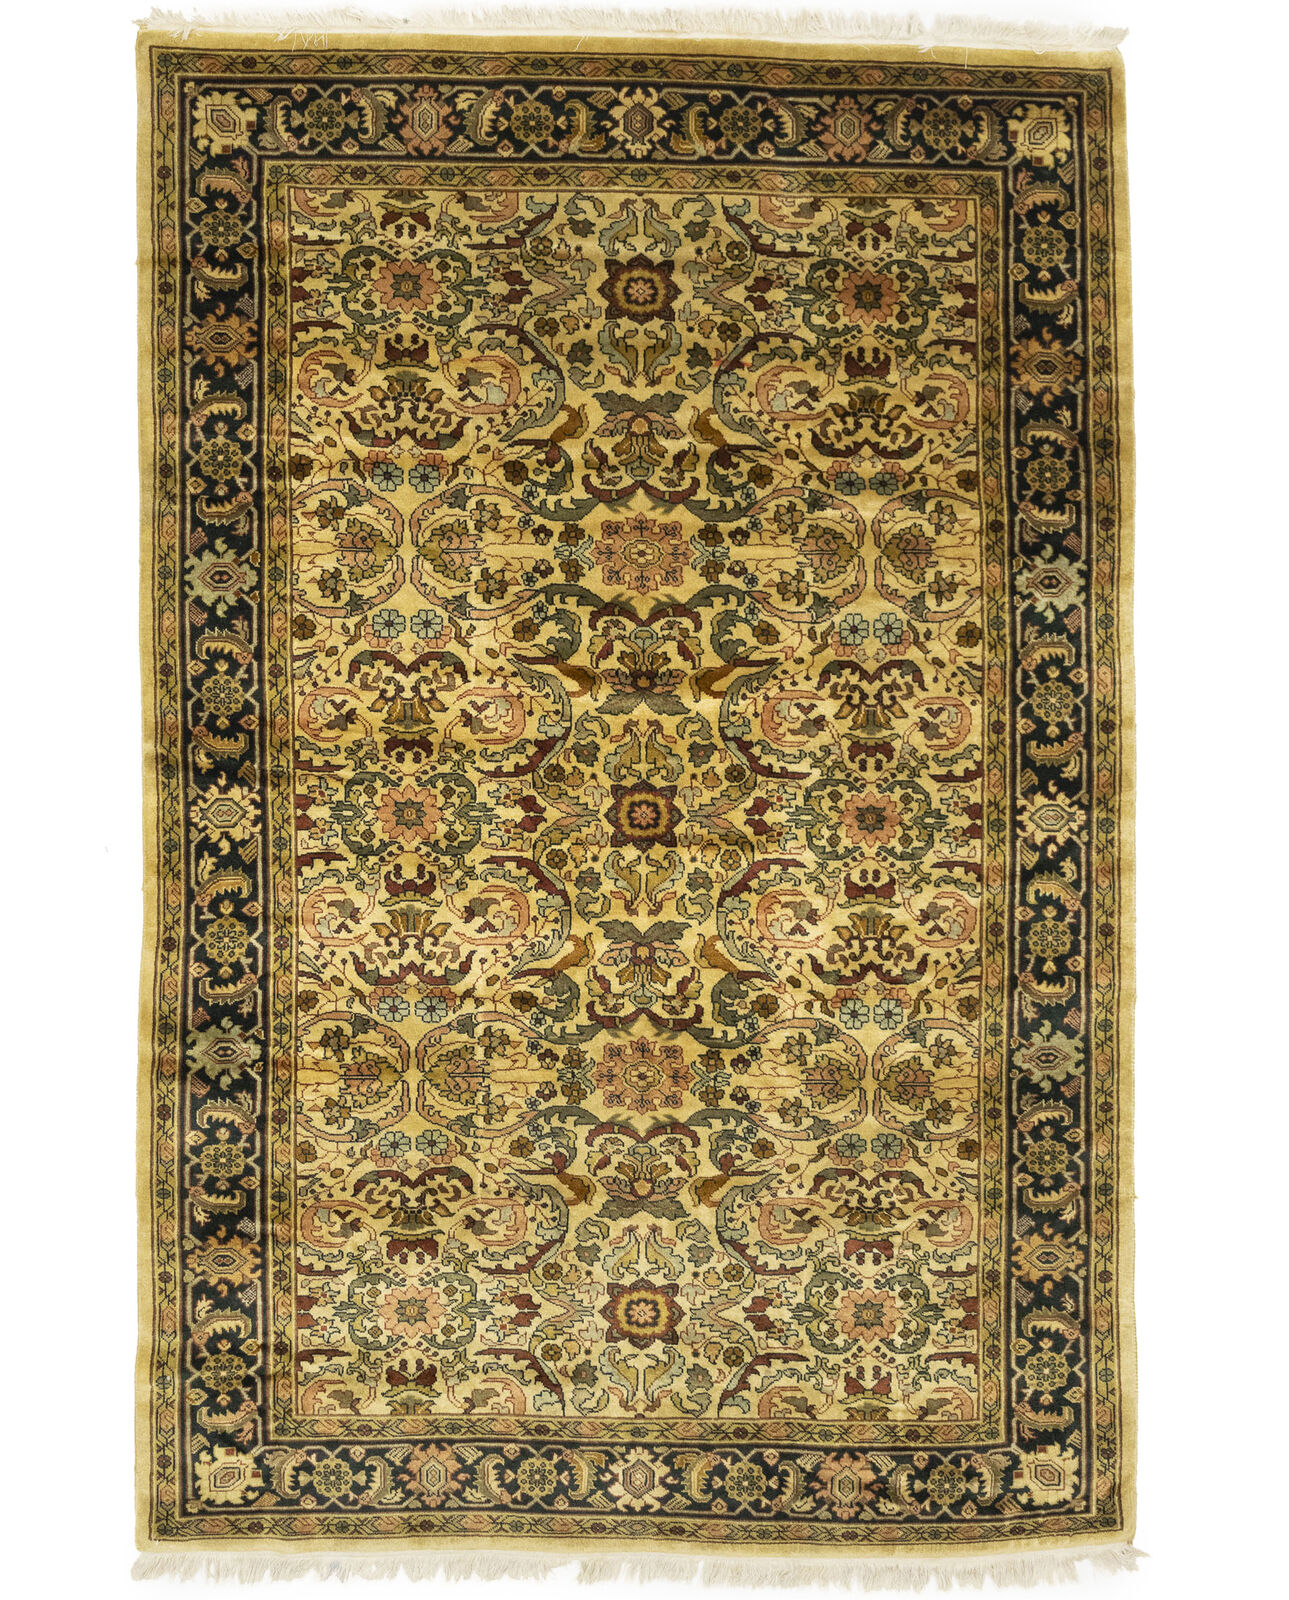 Room Decor Floral Style Oushak Entryway 6X9 Oriental Rug Hand-Knotted Carpet